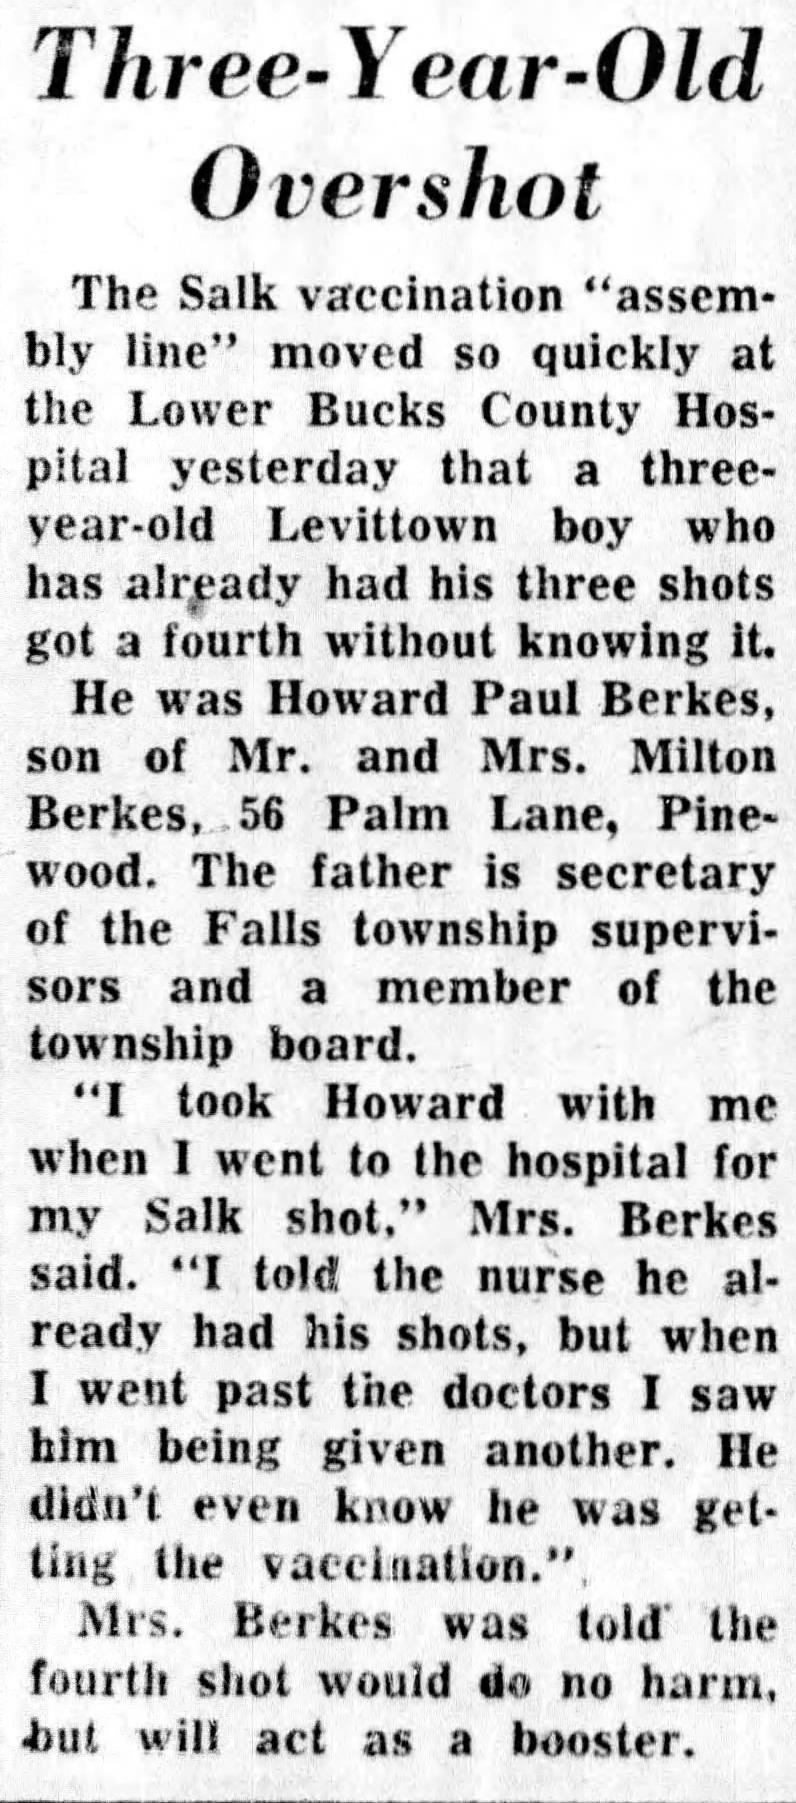 A newspaper clipping from the 1950s describes Howard Berkes' accidental 